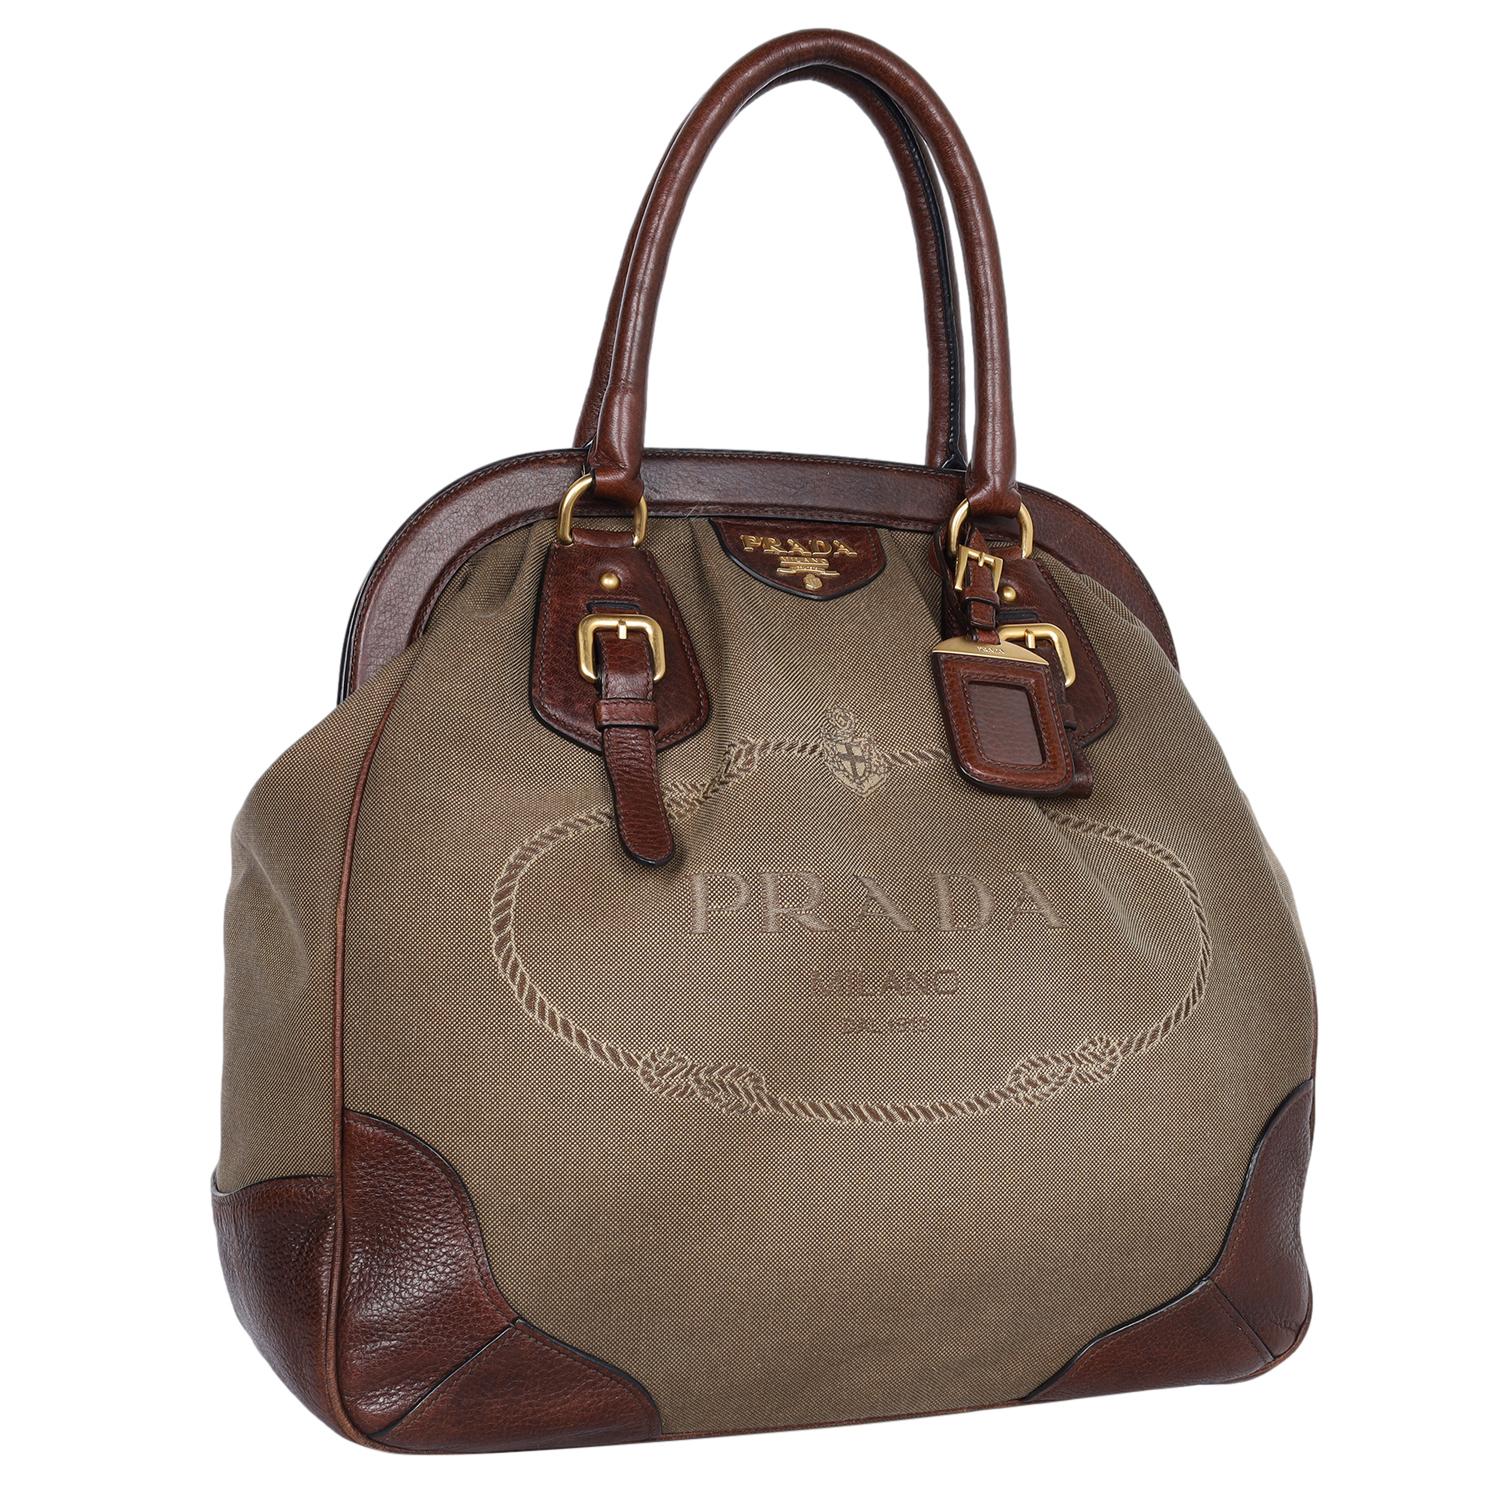 Authentic, pre-loved Prada brown canvas and leather shoulder bag. The refined look and durable construction define this smart Prada shoulder bag that can be your ideal pick for any season. Features leather rolled handles, canvas, and leather